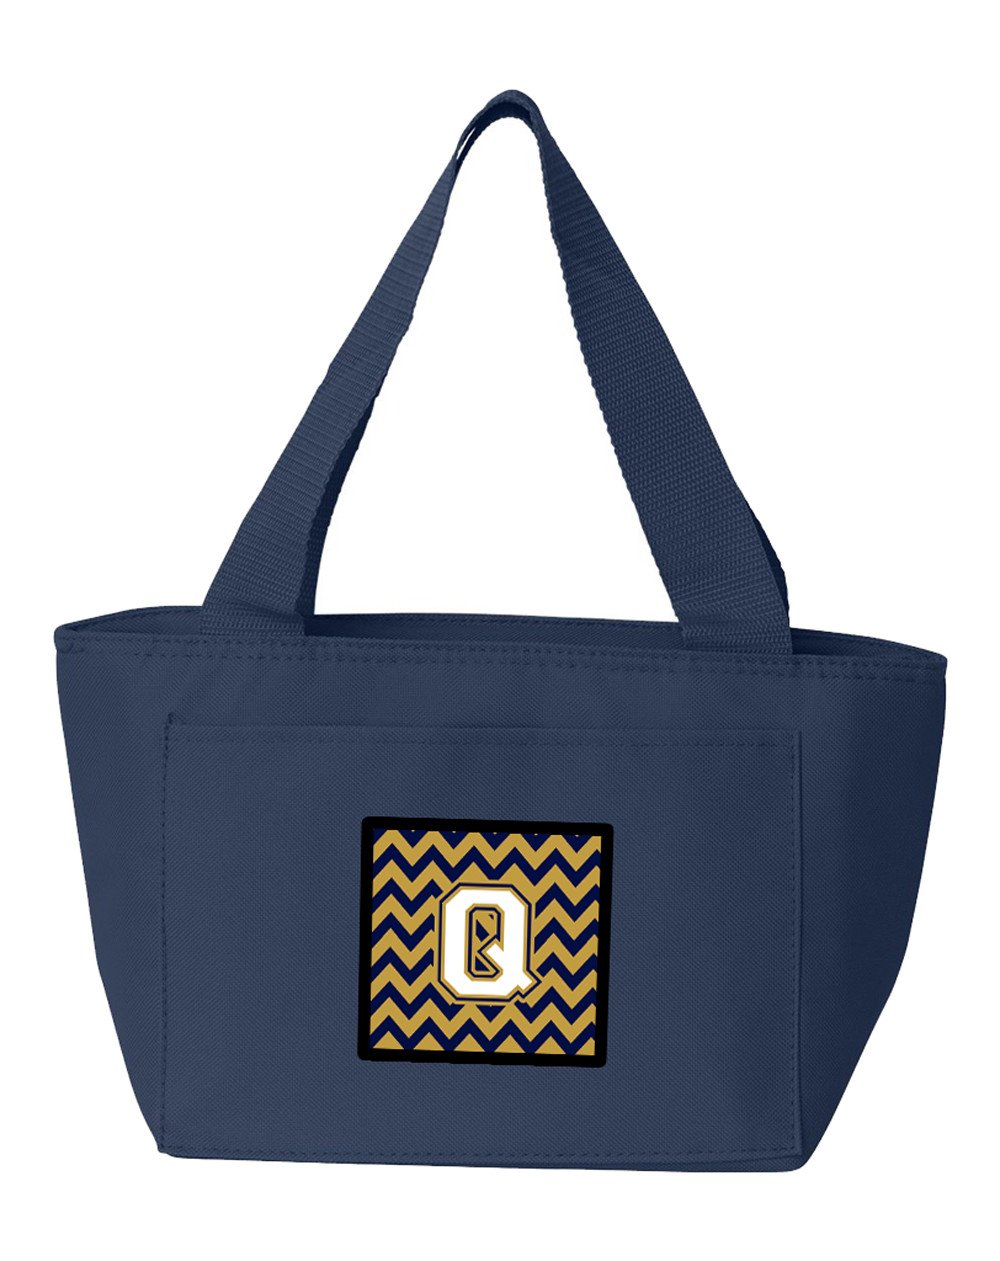 Letter Q Chevron Navy Blue and Gold Lunch Bag CJ1057-QNA-8808 by Caroline's Treasures